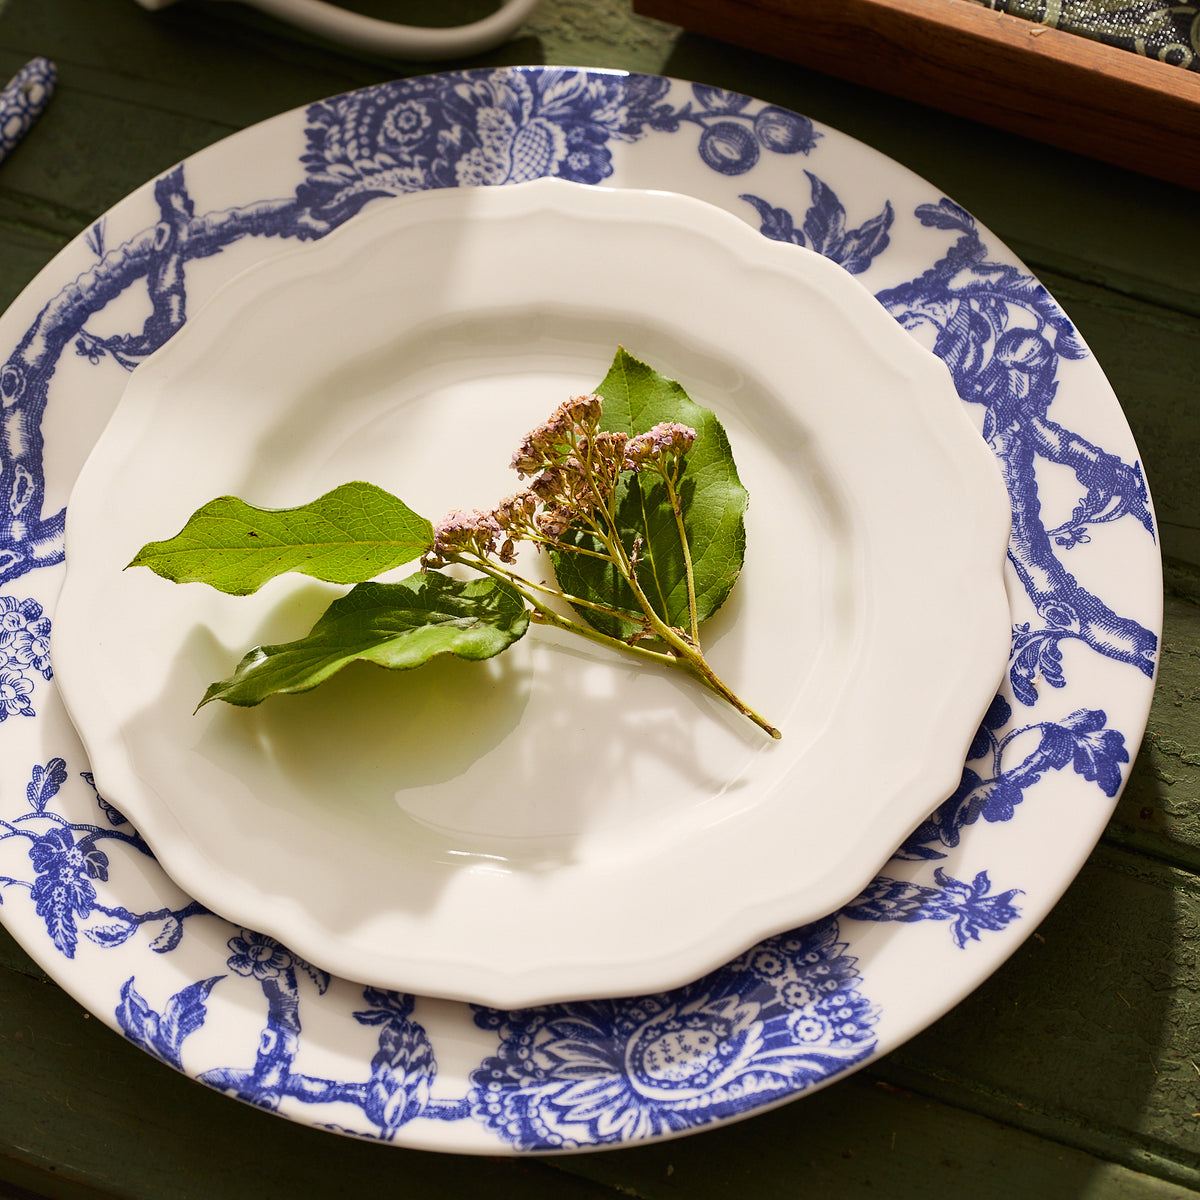 An Arcadia Rimmed Dinner Plate by Caskata Artisanal Home is placed on a table, with a white and blue decorative plate beneath it. On the top plate, there are a few green leaves and small, dried pink flowers. This display showcases premium porcelain dinnerware that elevates your dining experience with graphic florals and timeless fashion.